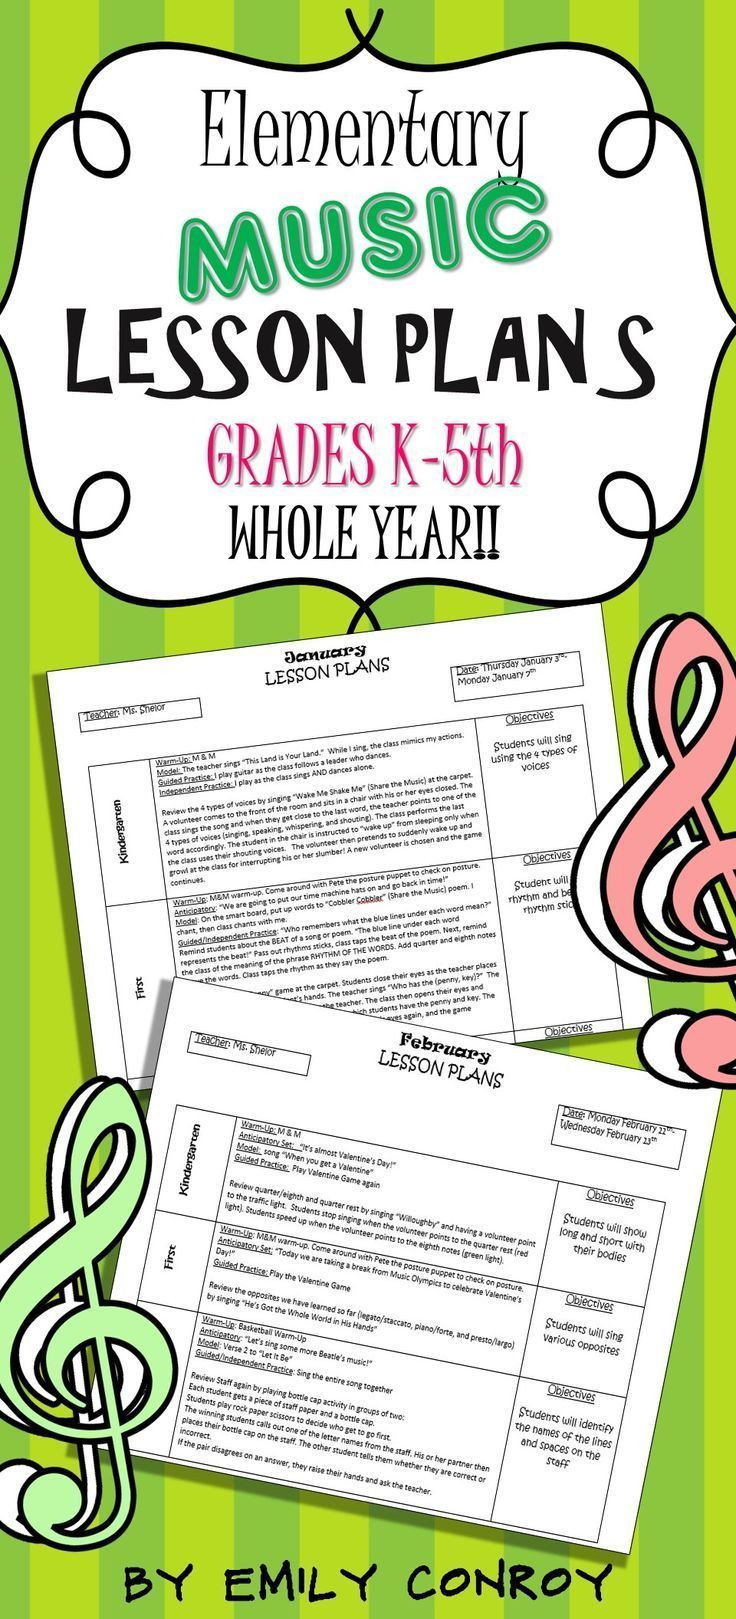 Music Lesson Plans for Preschool Elementary Music Lessons Plans these Plans are Creative